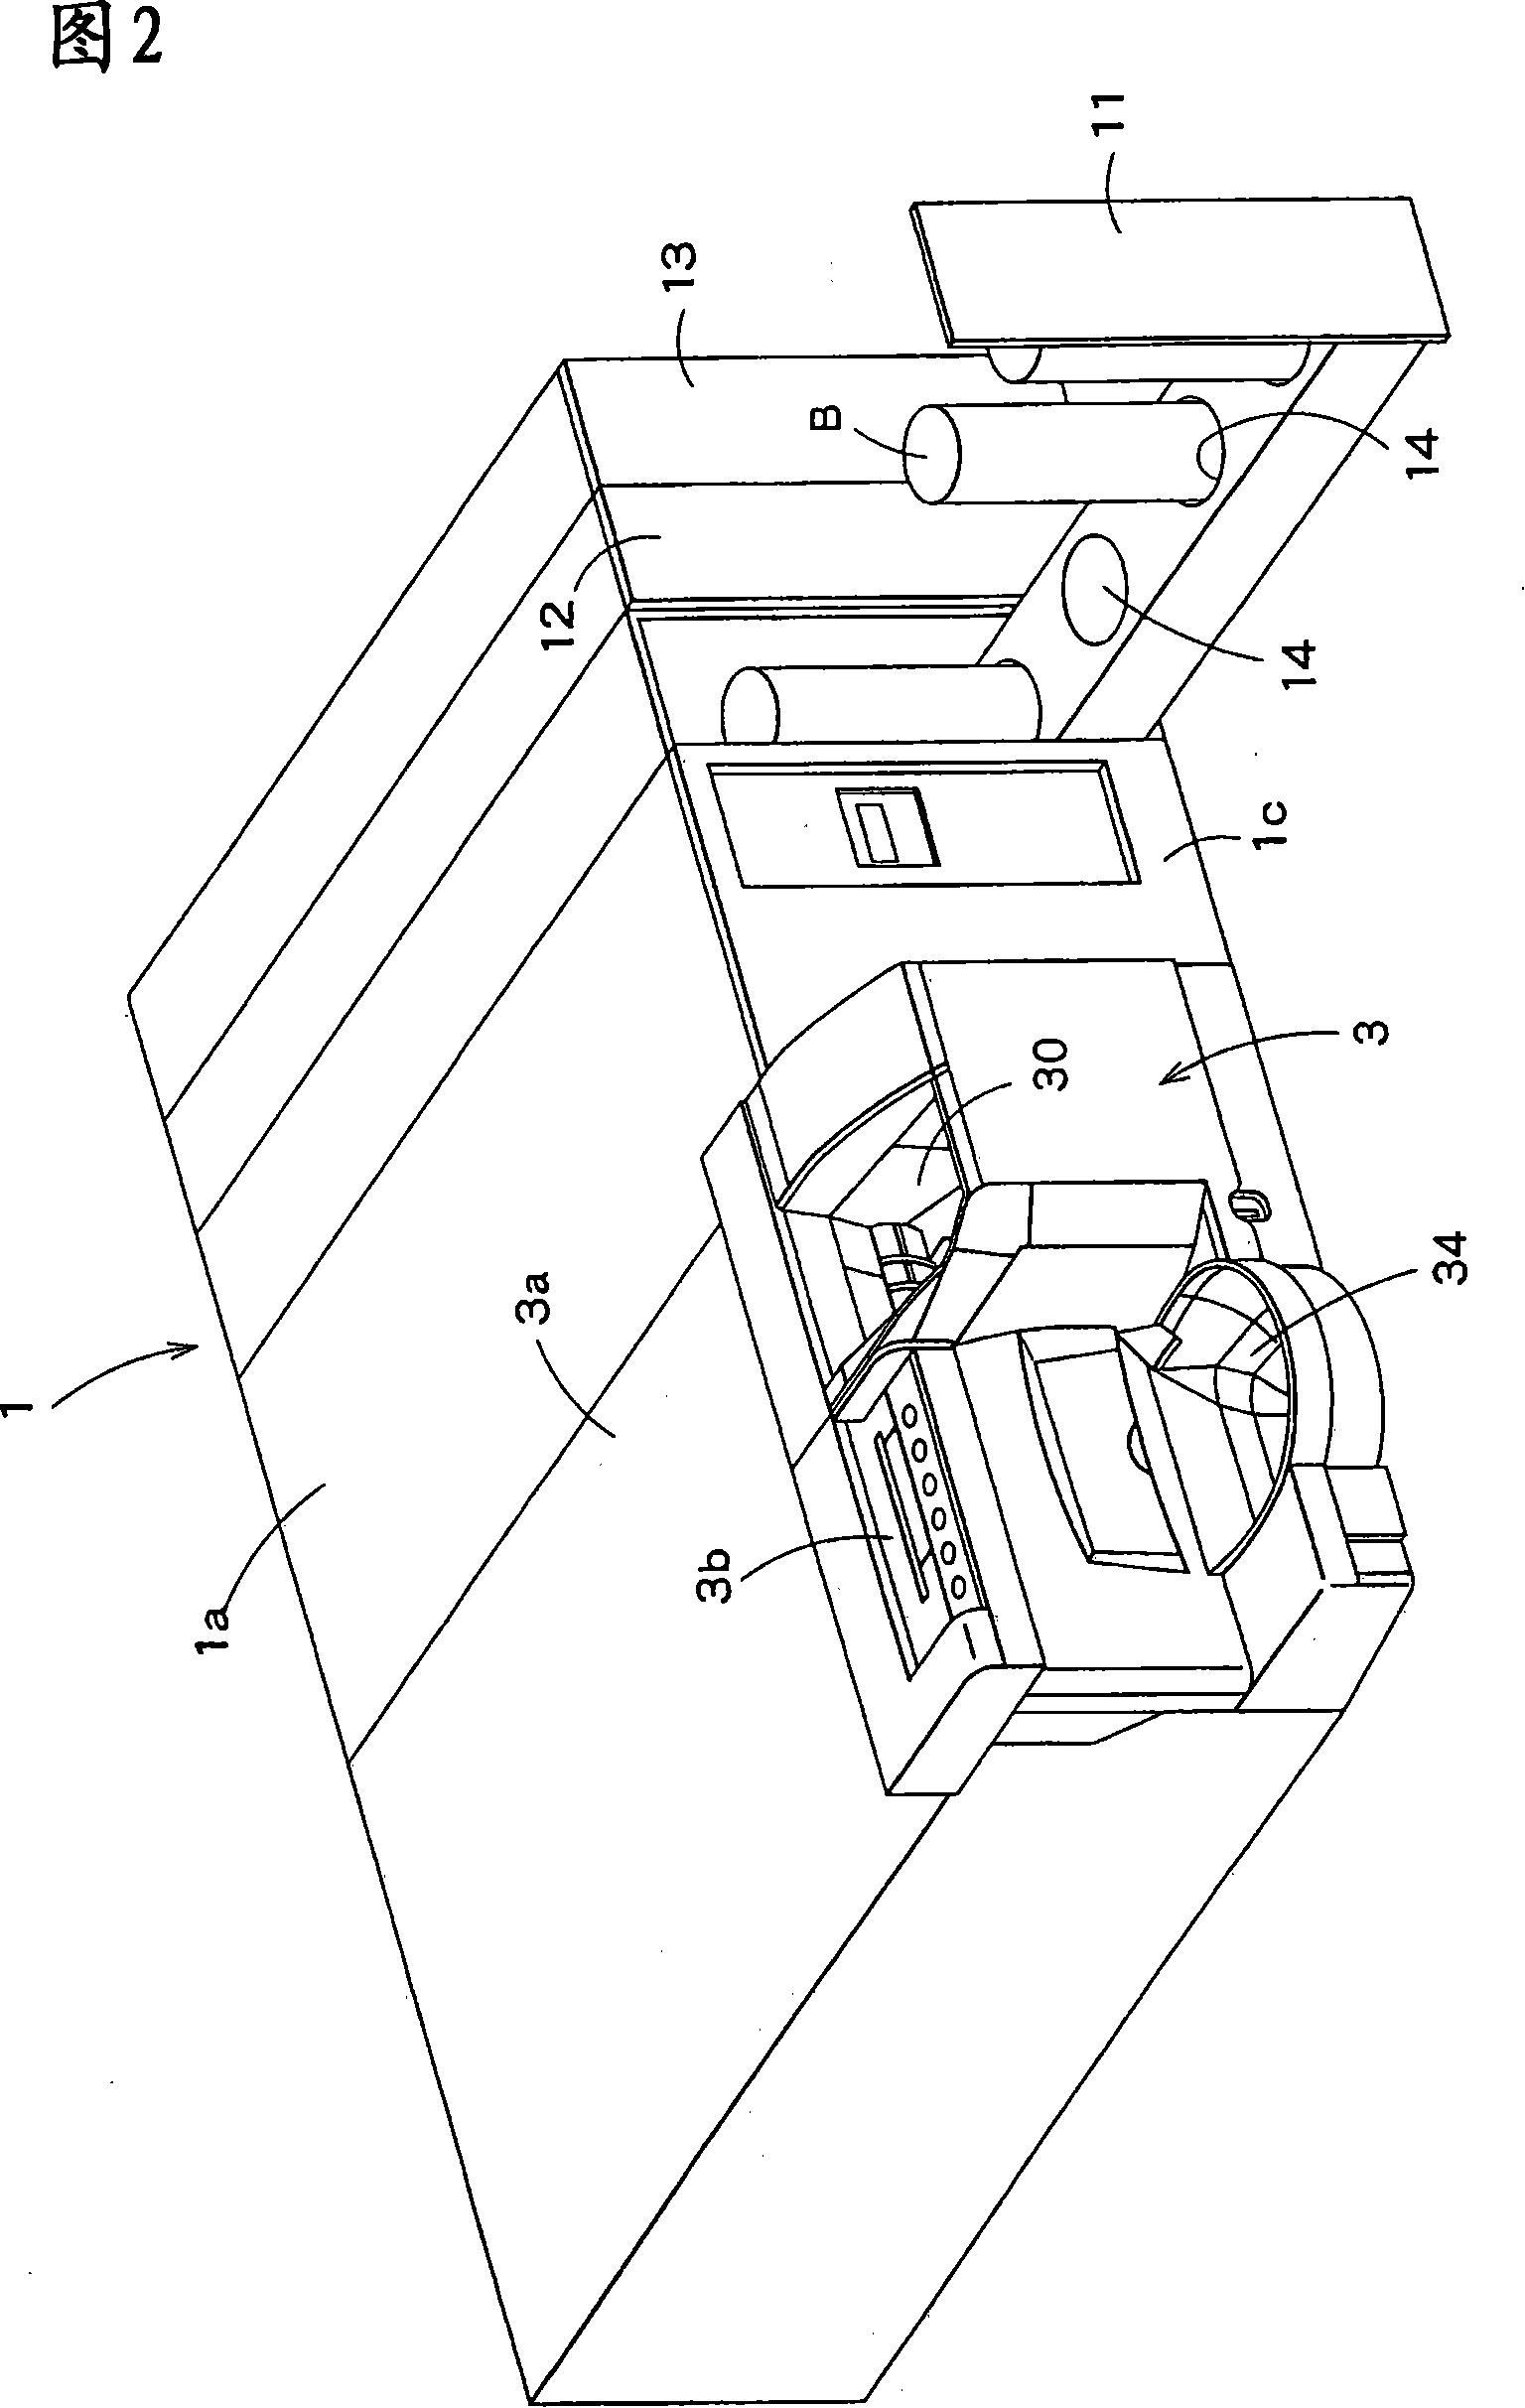 Coin-roll storing machine